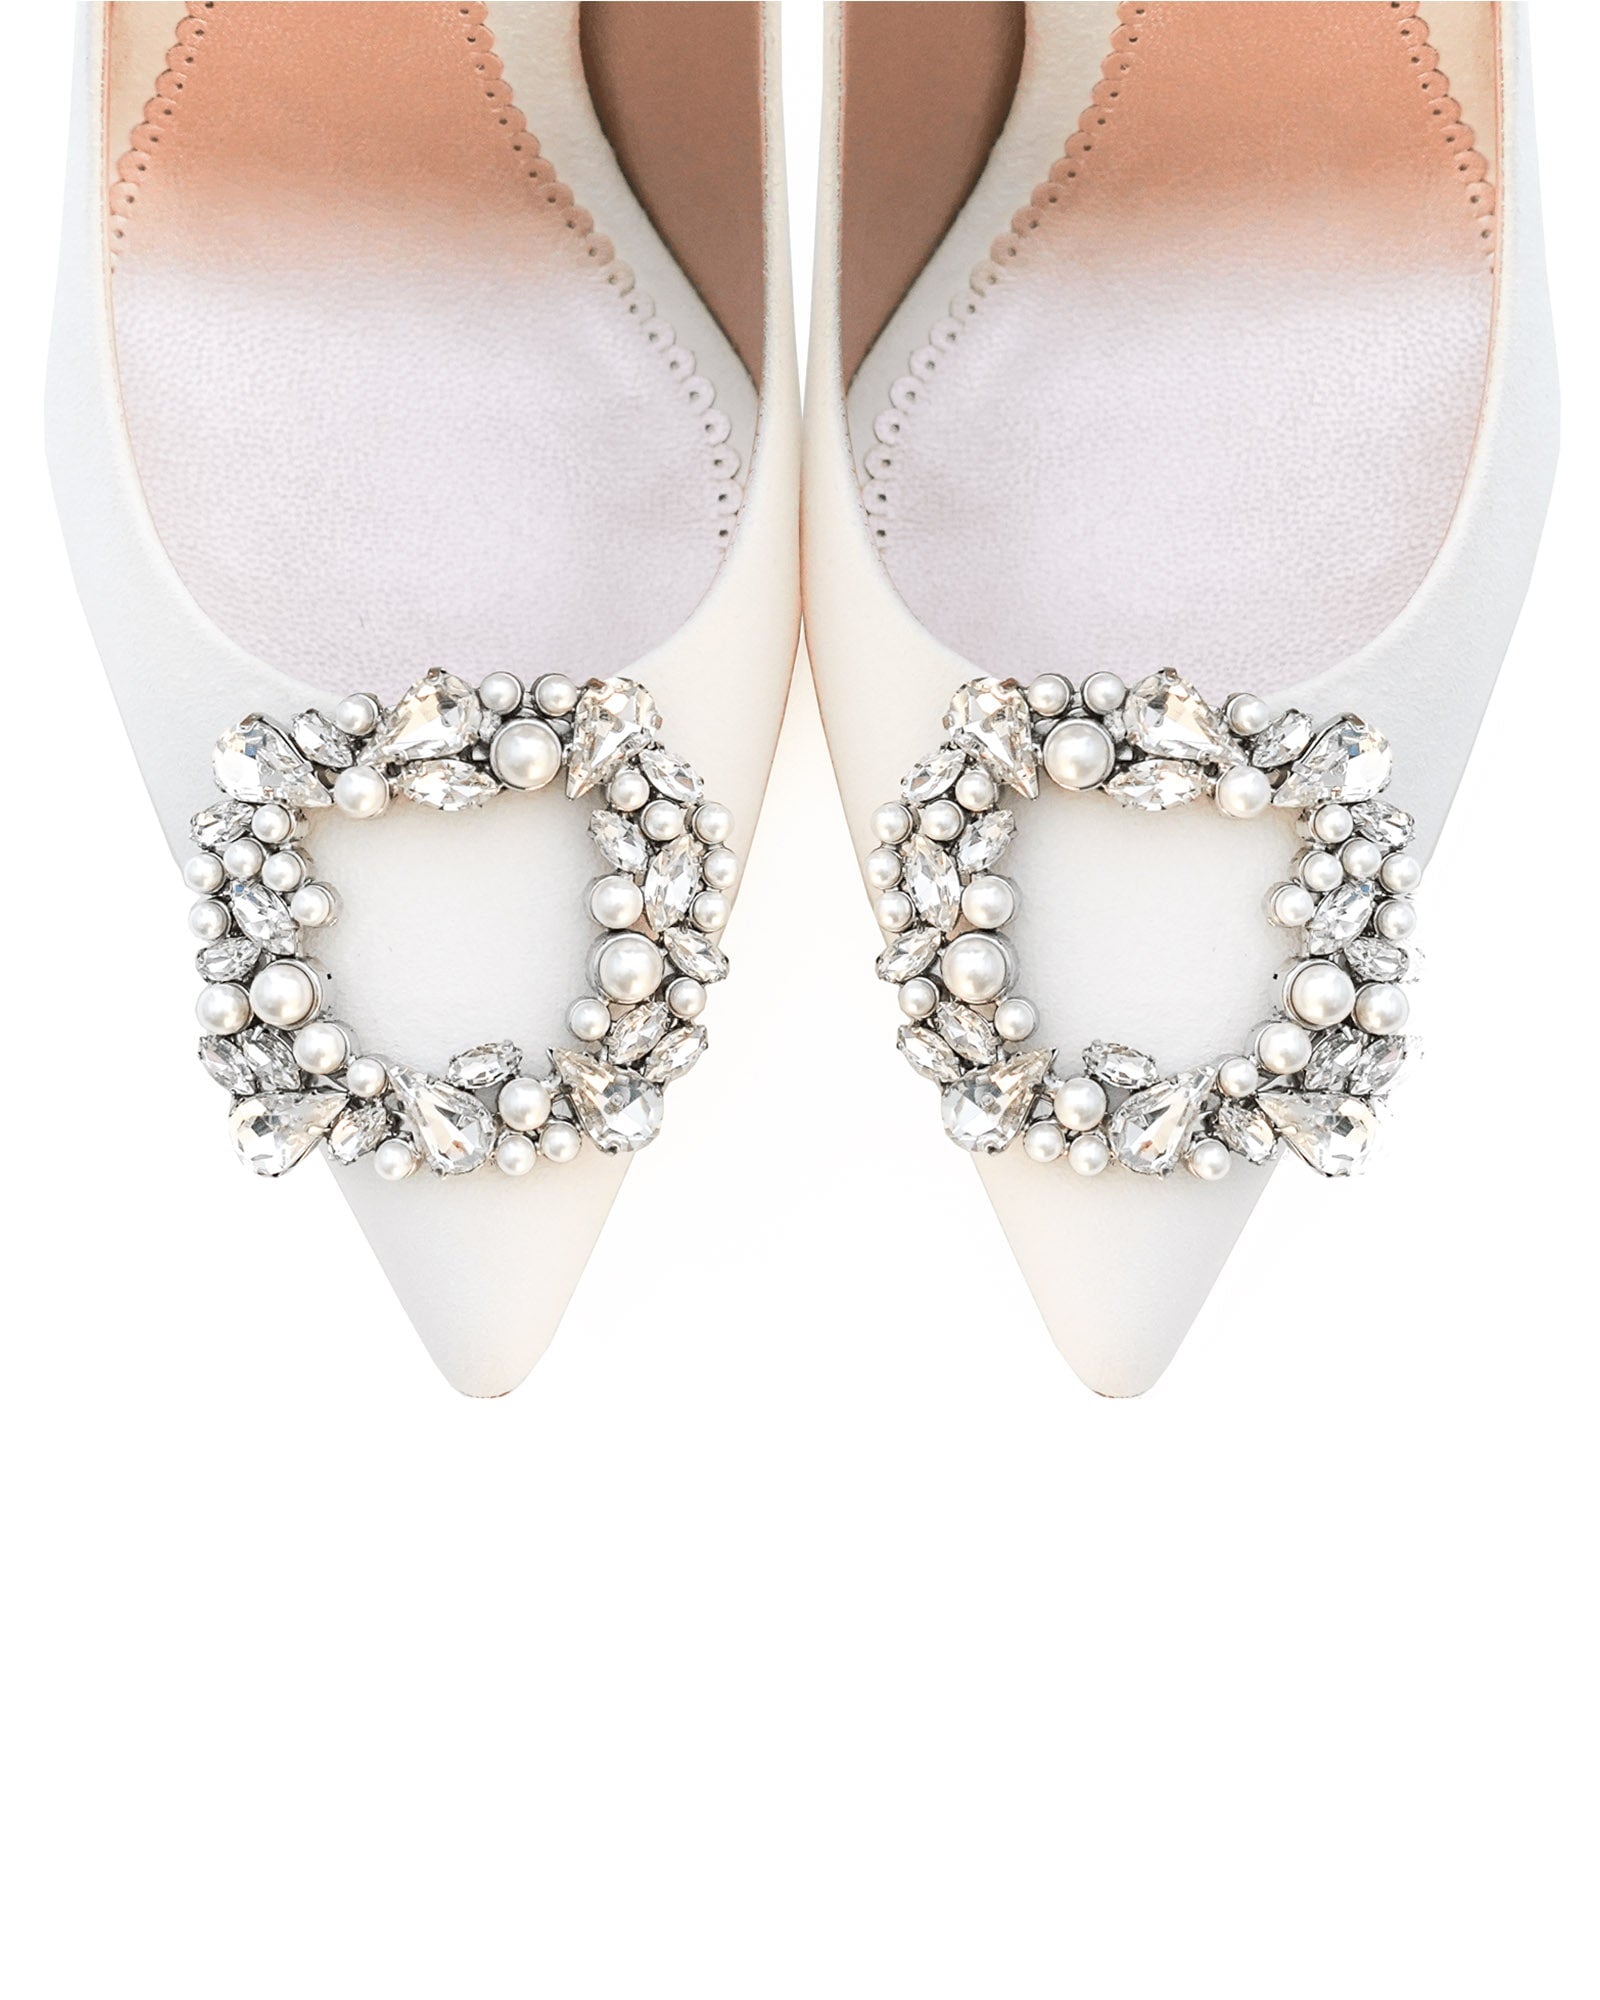 Bejewelled Crystal & Pearl Shoe Clip Shoe Clip Crystal Shoe Clip  image